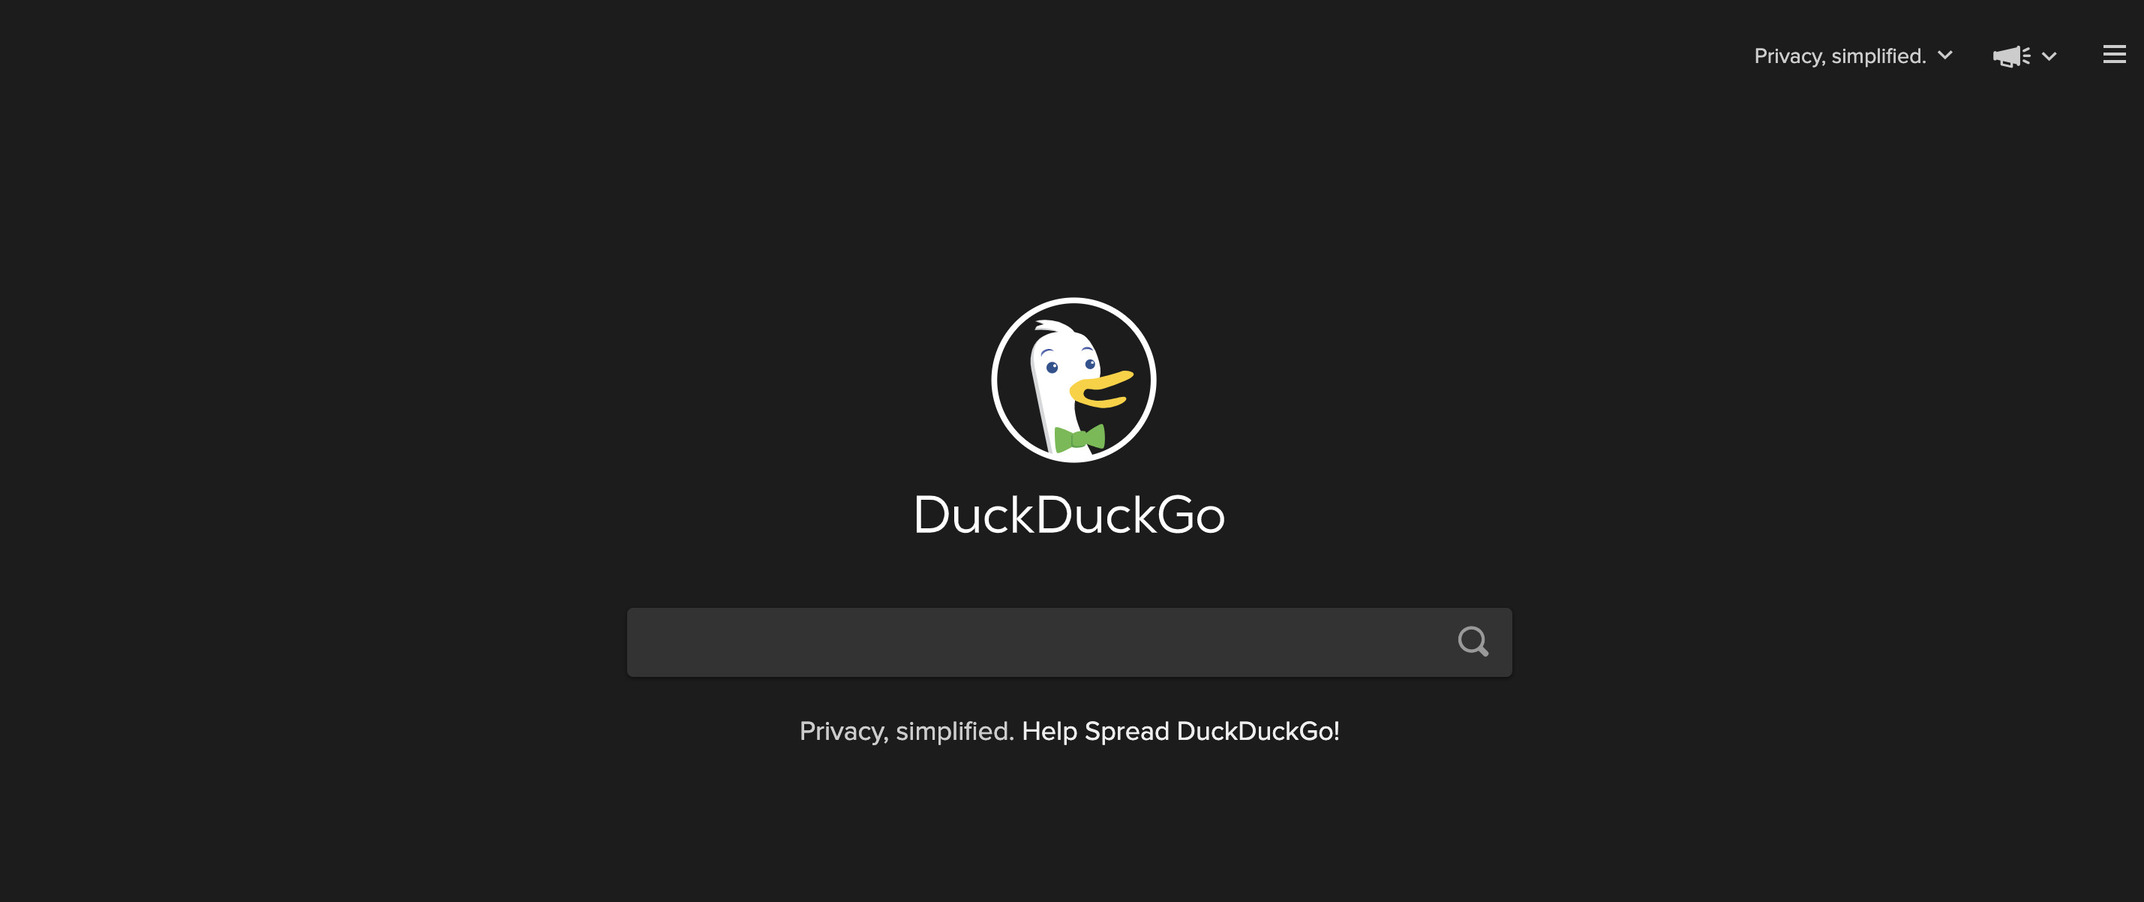 duckduckgo: most secure search engine